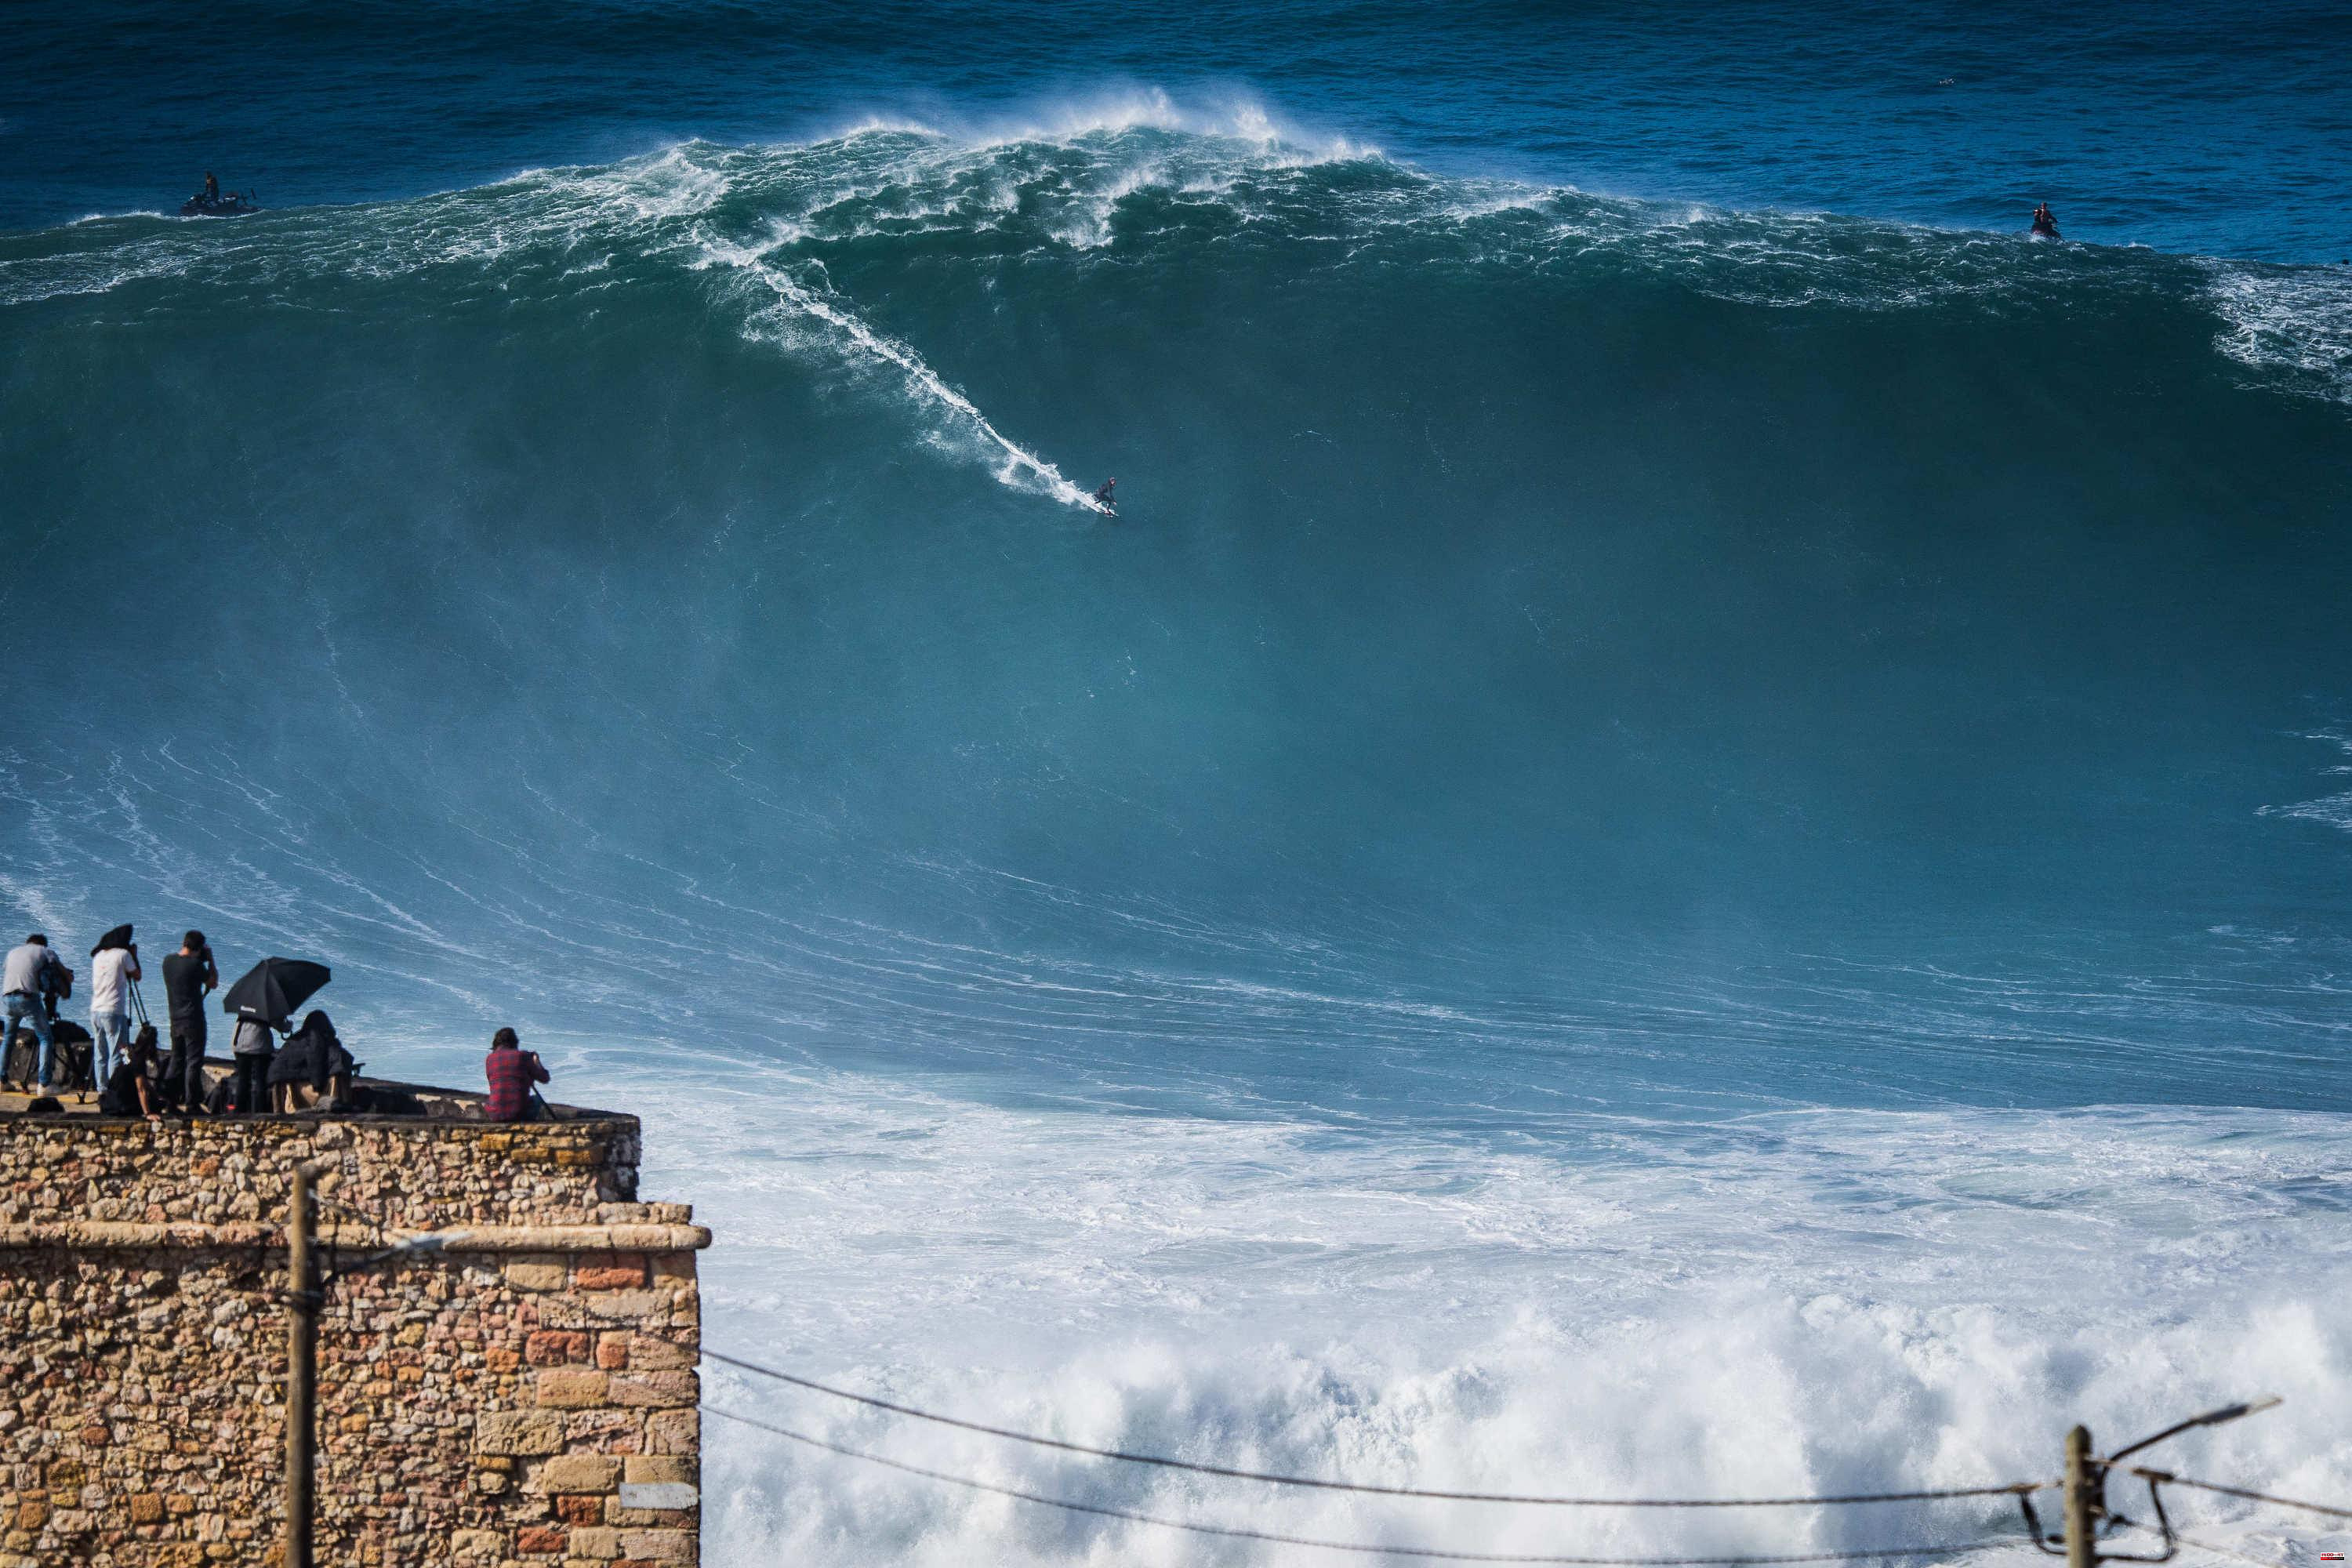 In video, the German Steudtner wins the record for the biggest wave surfed